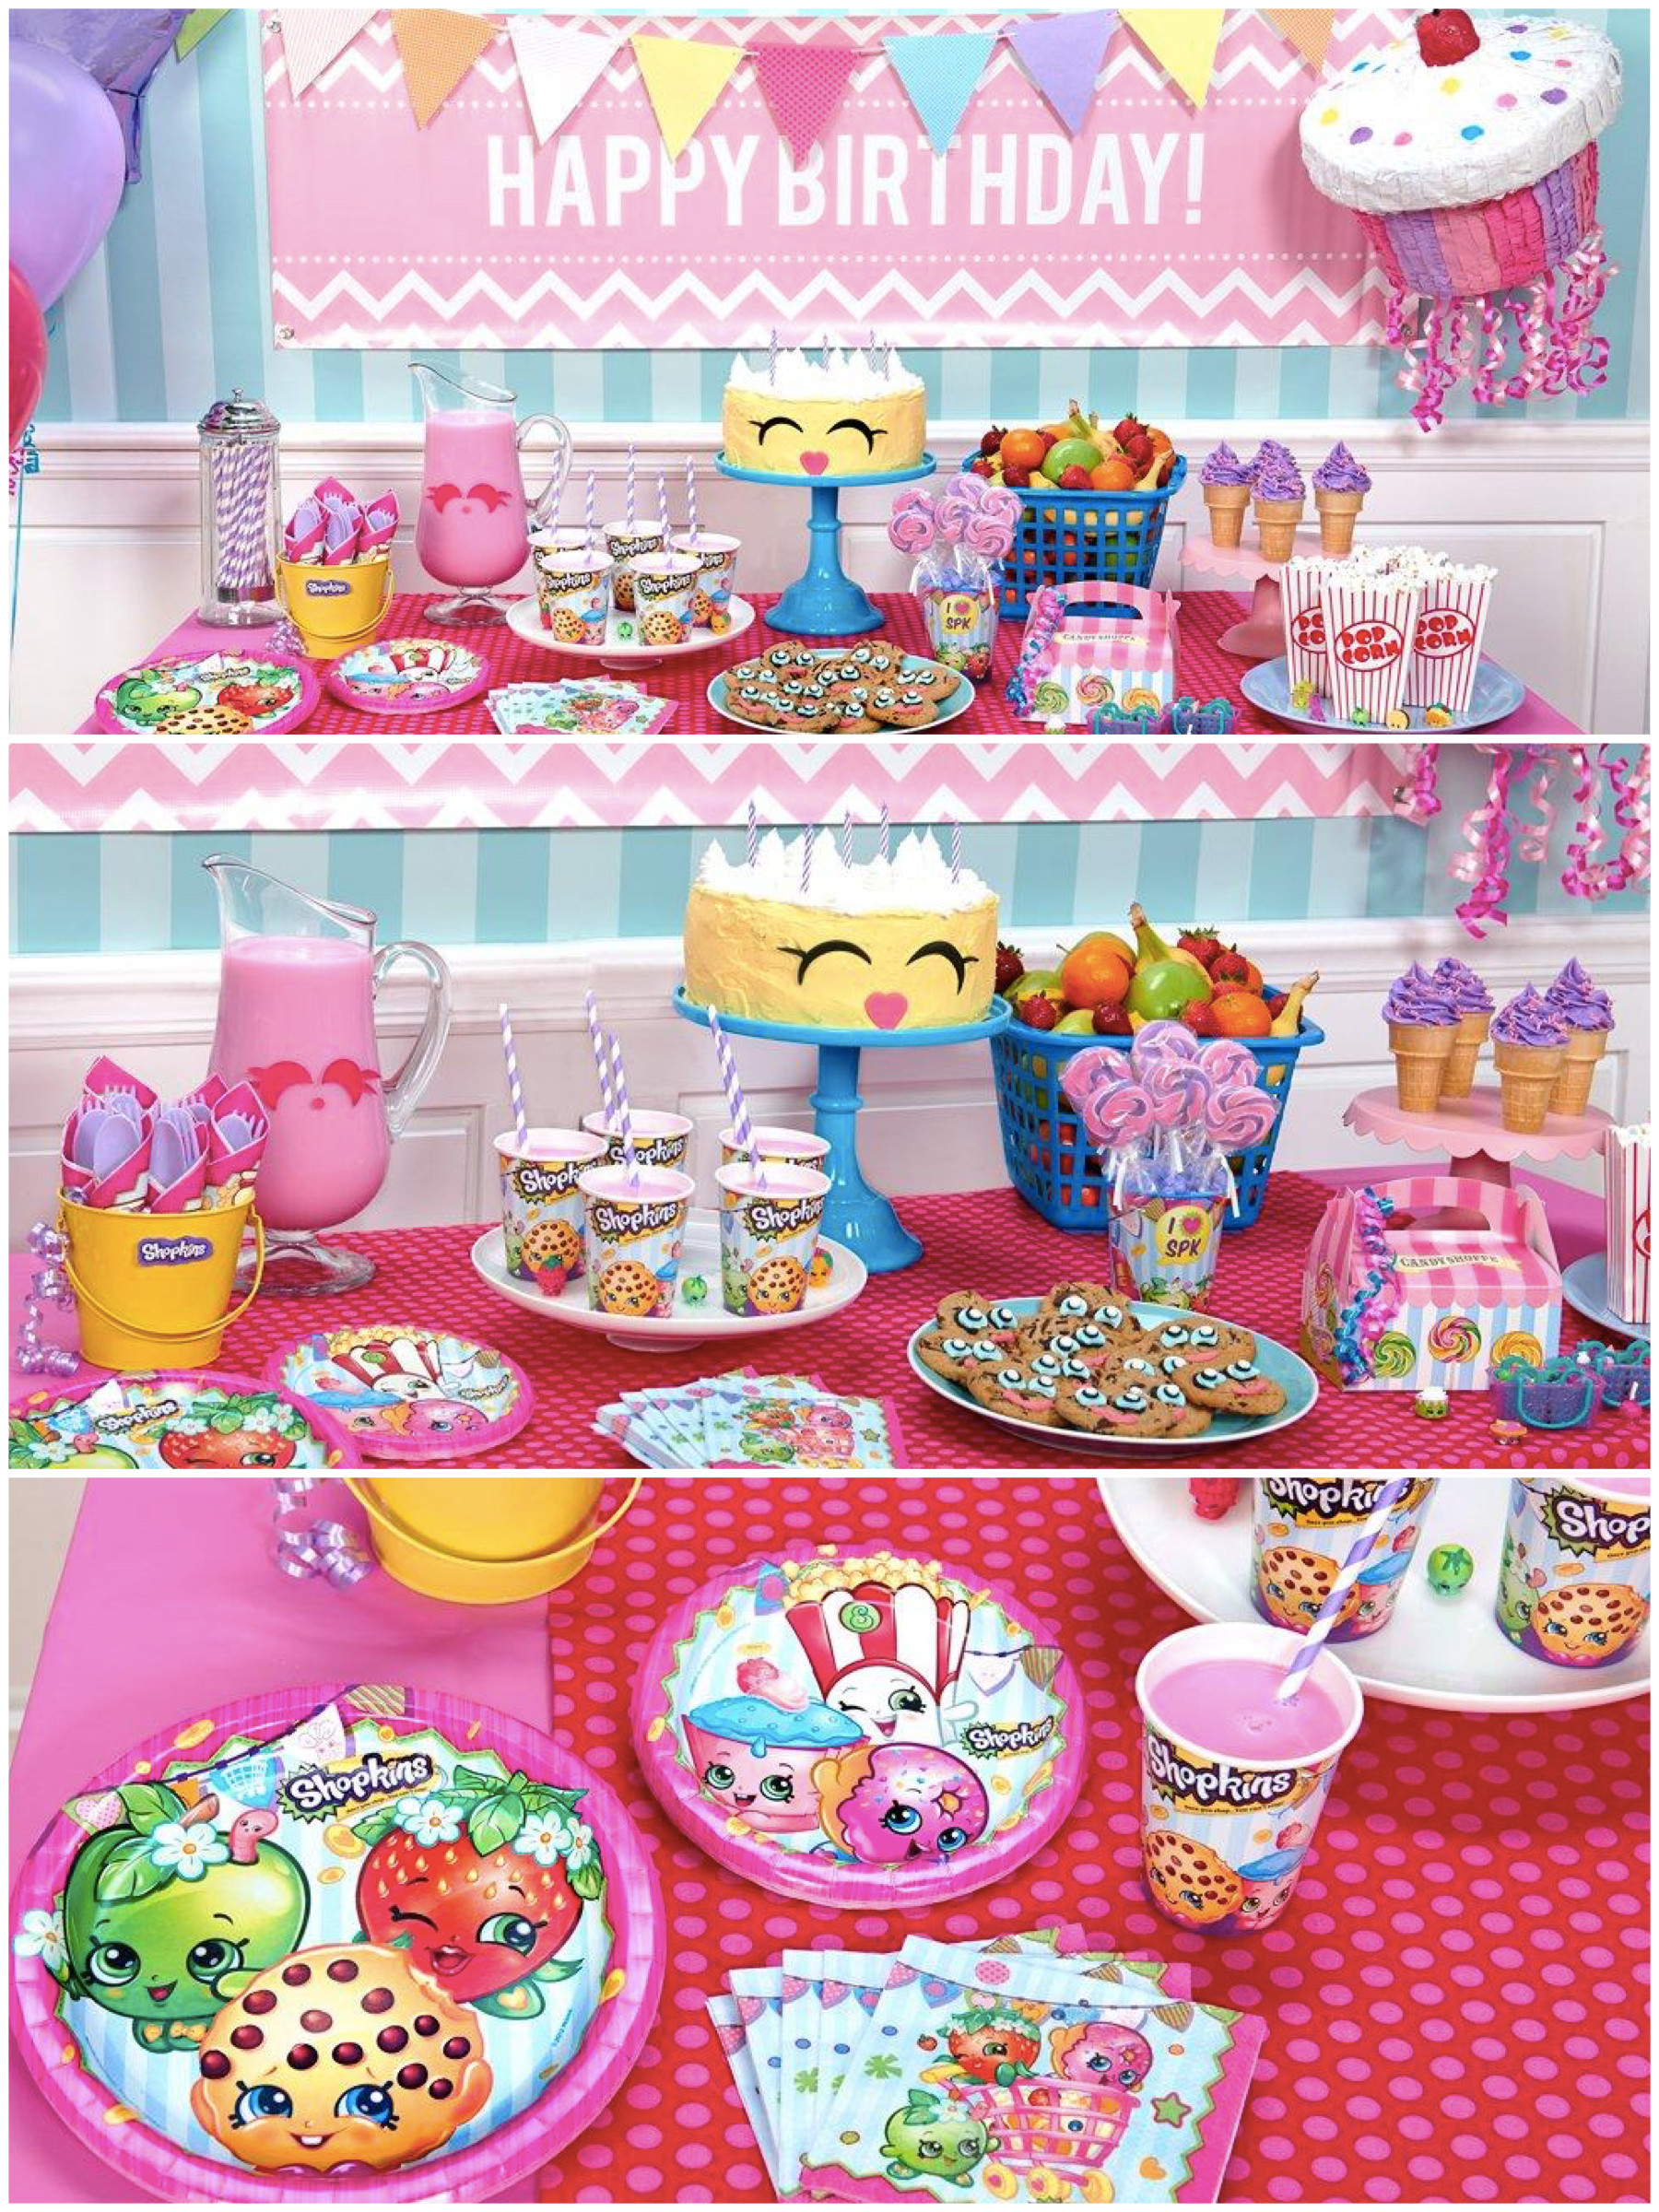 Birthday Party Decorations
 Shopkins Birthday Party Planning Ideas & Supplies